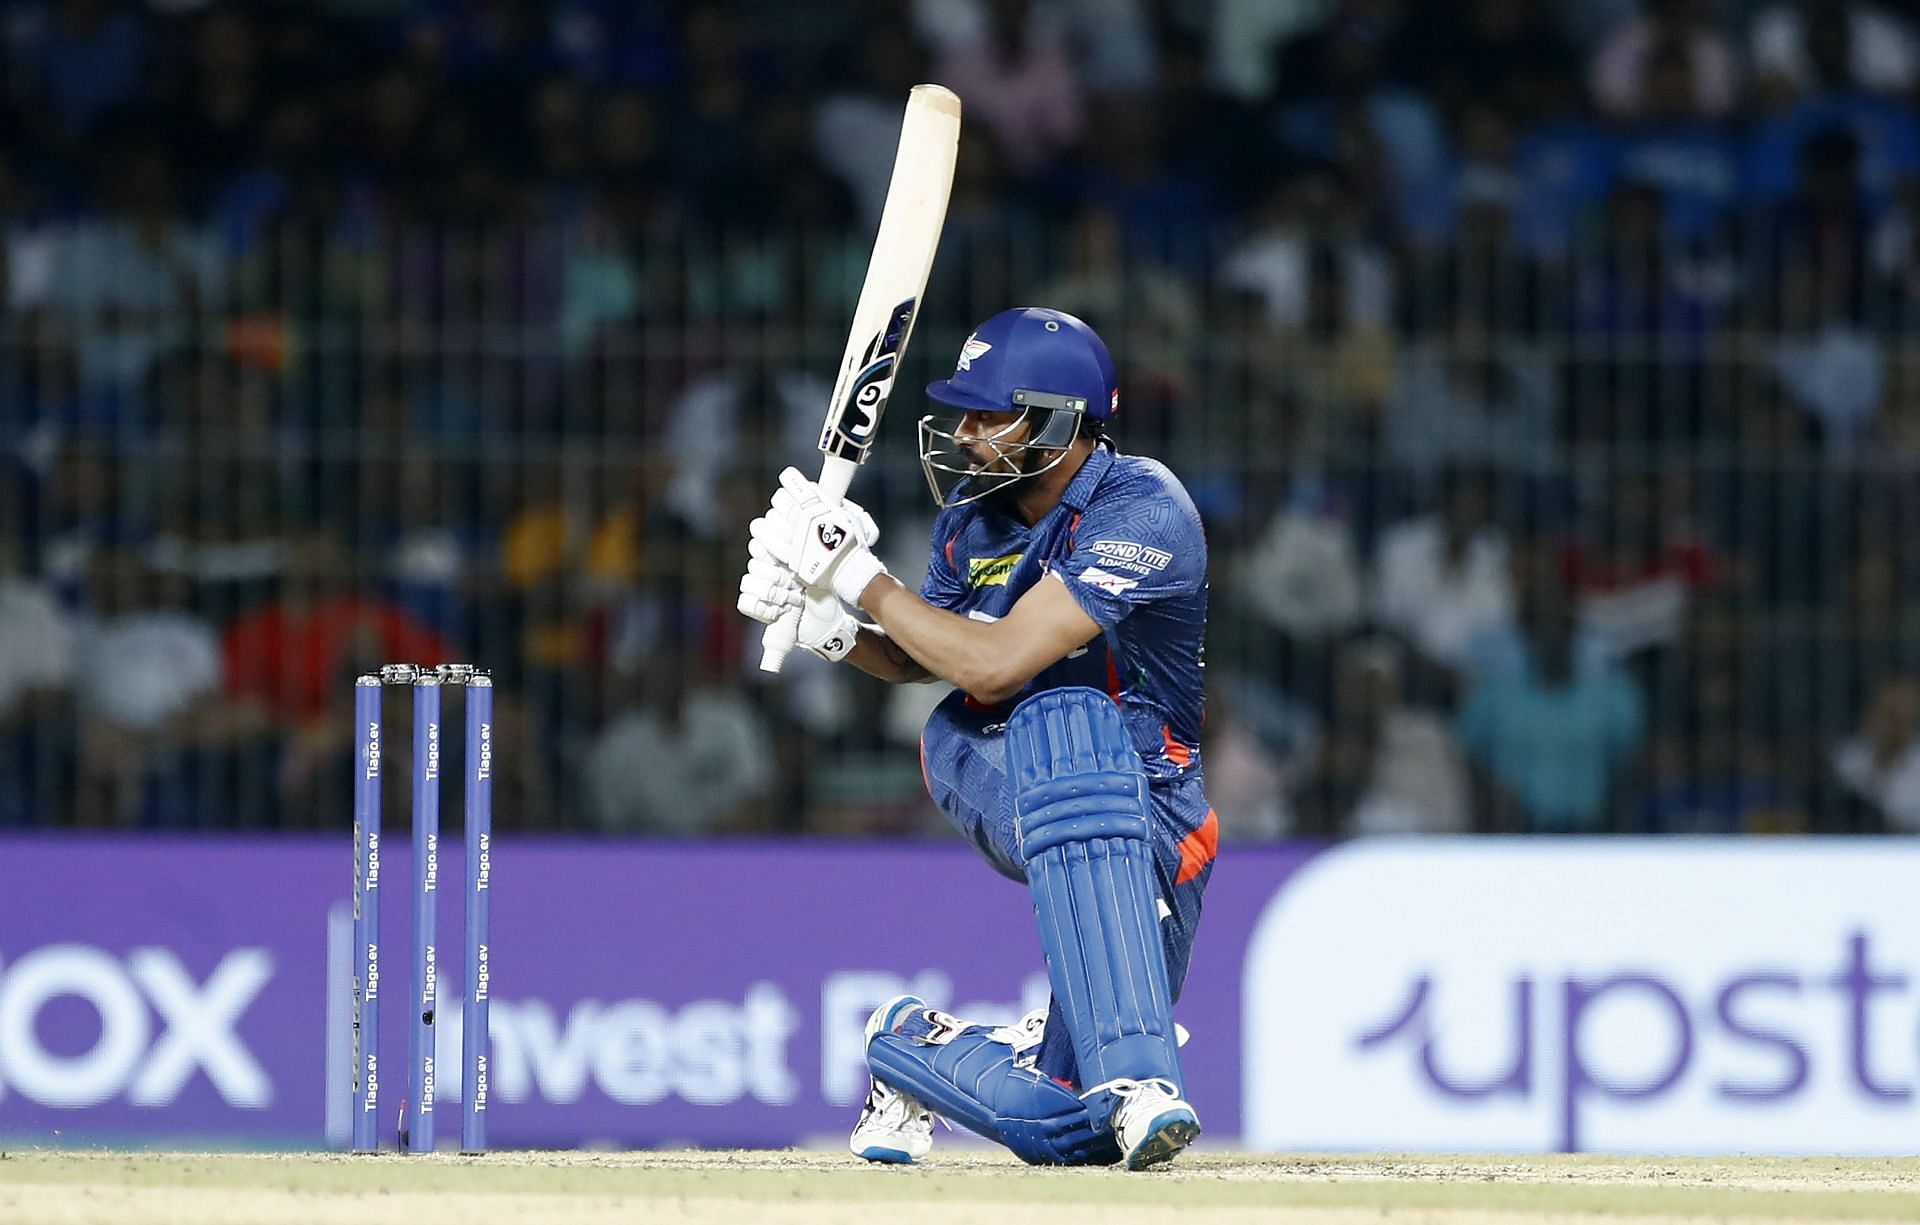 Krunal Pandya in action (Image Courtesy: Getty)